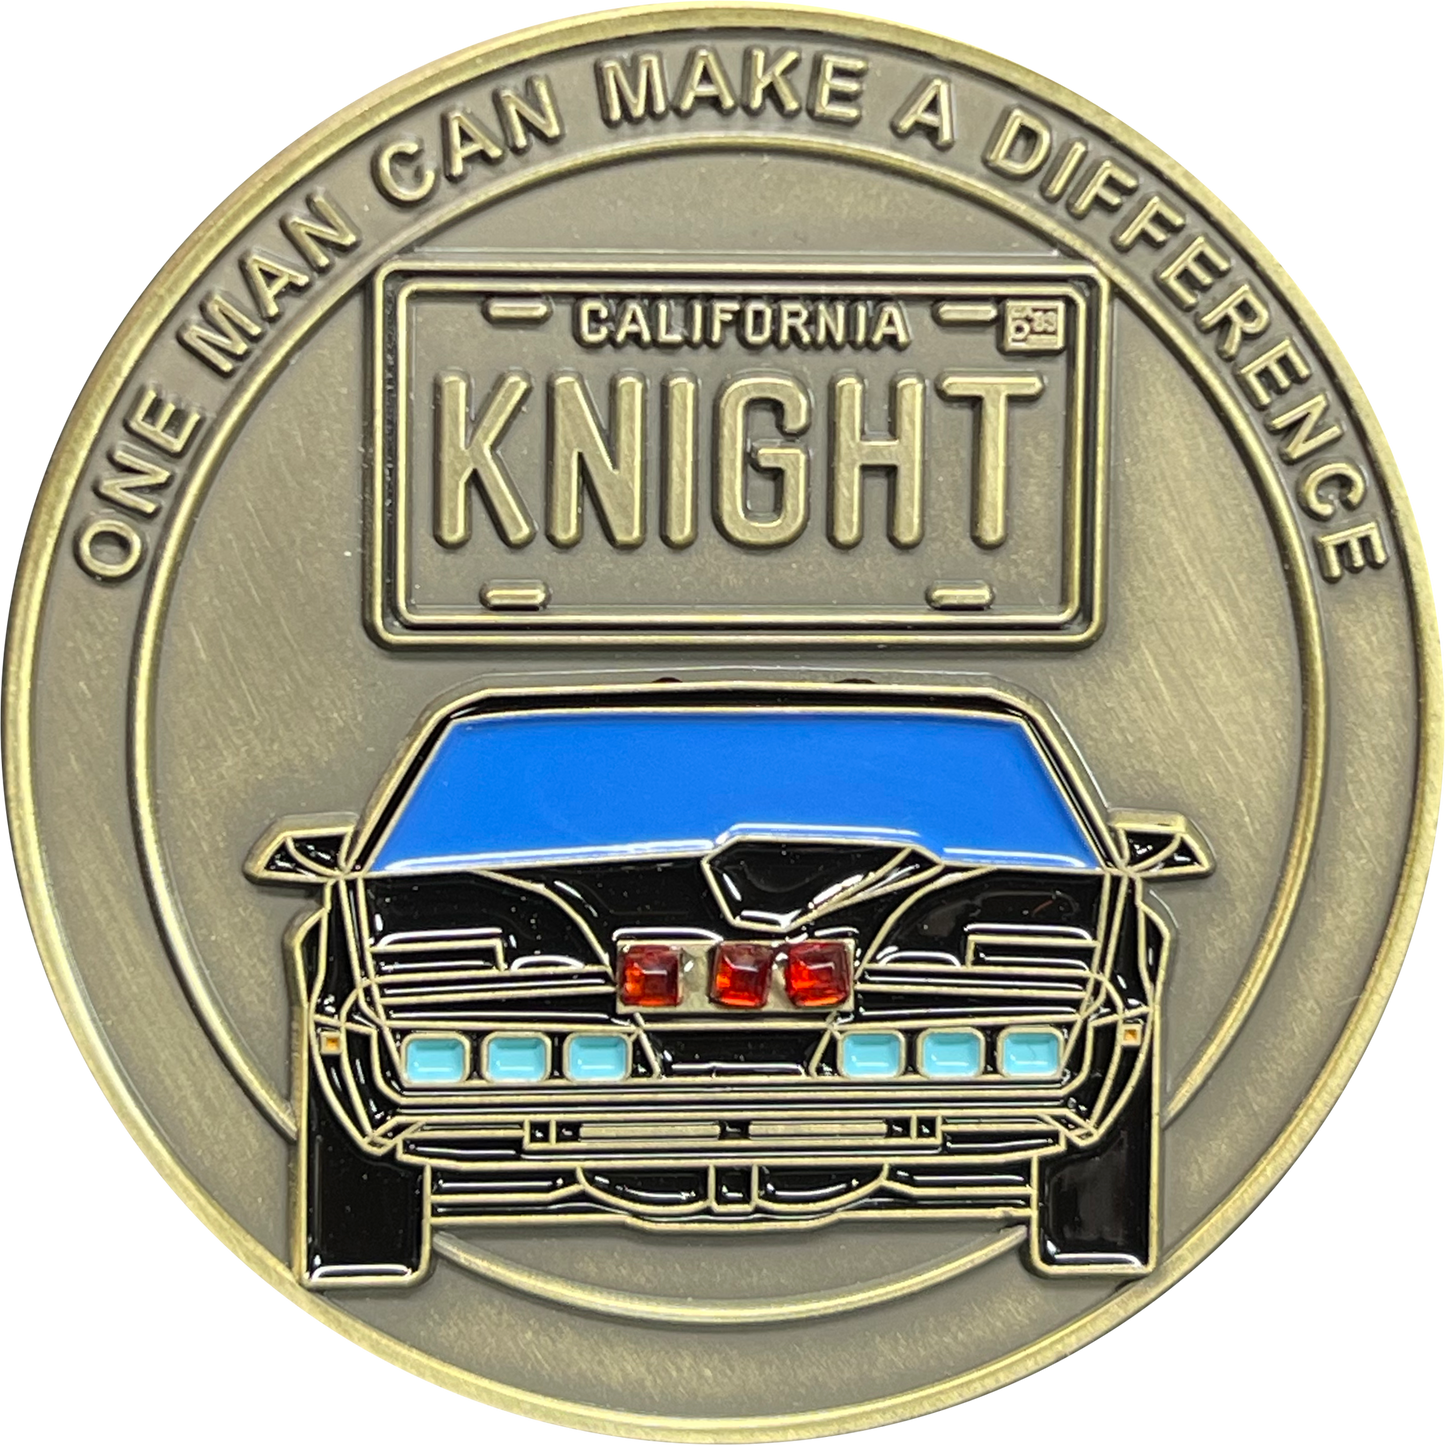 BL13-008 Knight Rider license plate KITT voice box Challenge Coin with serial number